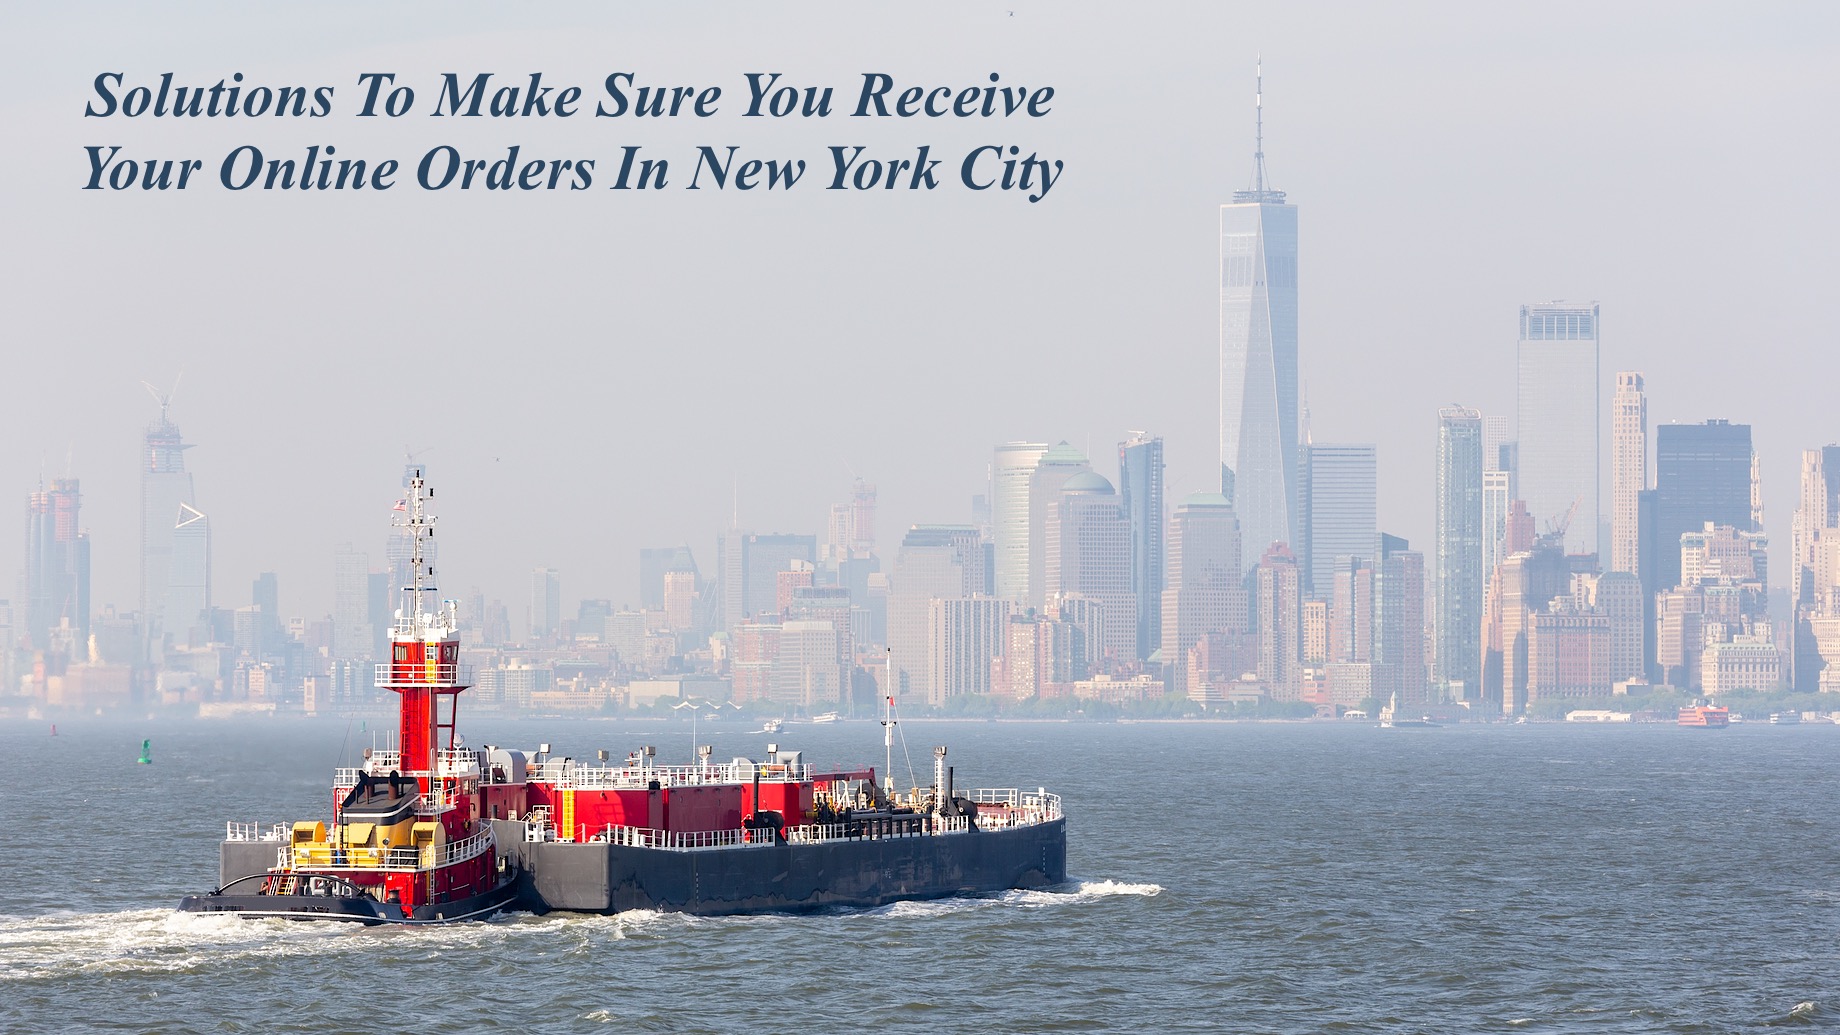 Solutions To Make Sure You Receive Your Online Orders In New York City